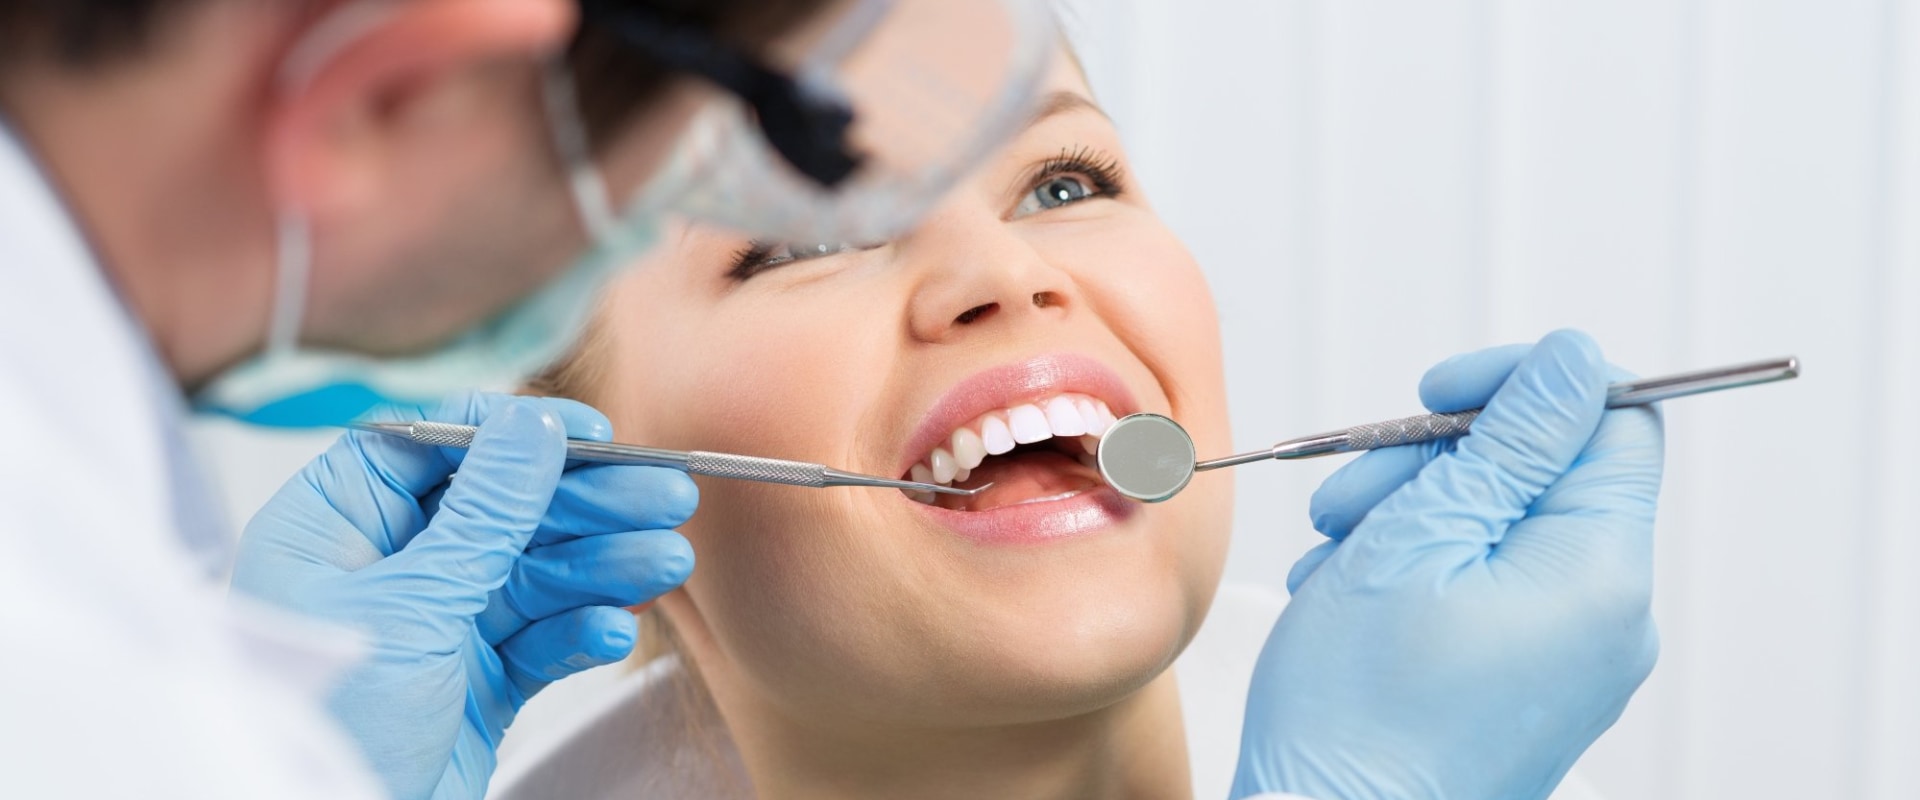 Why Does the Dentist Need Your Social Security Number?